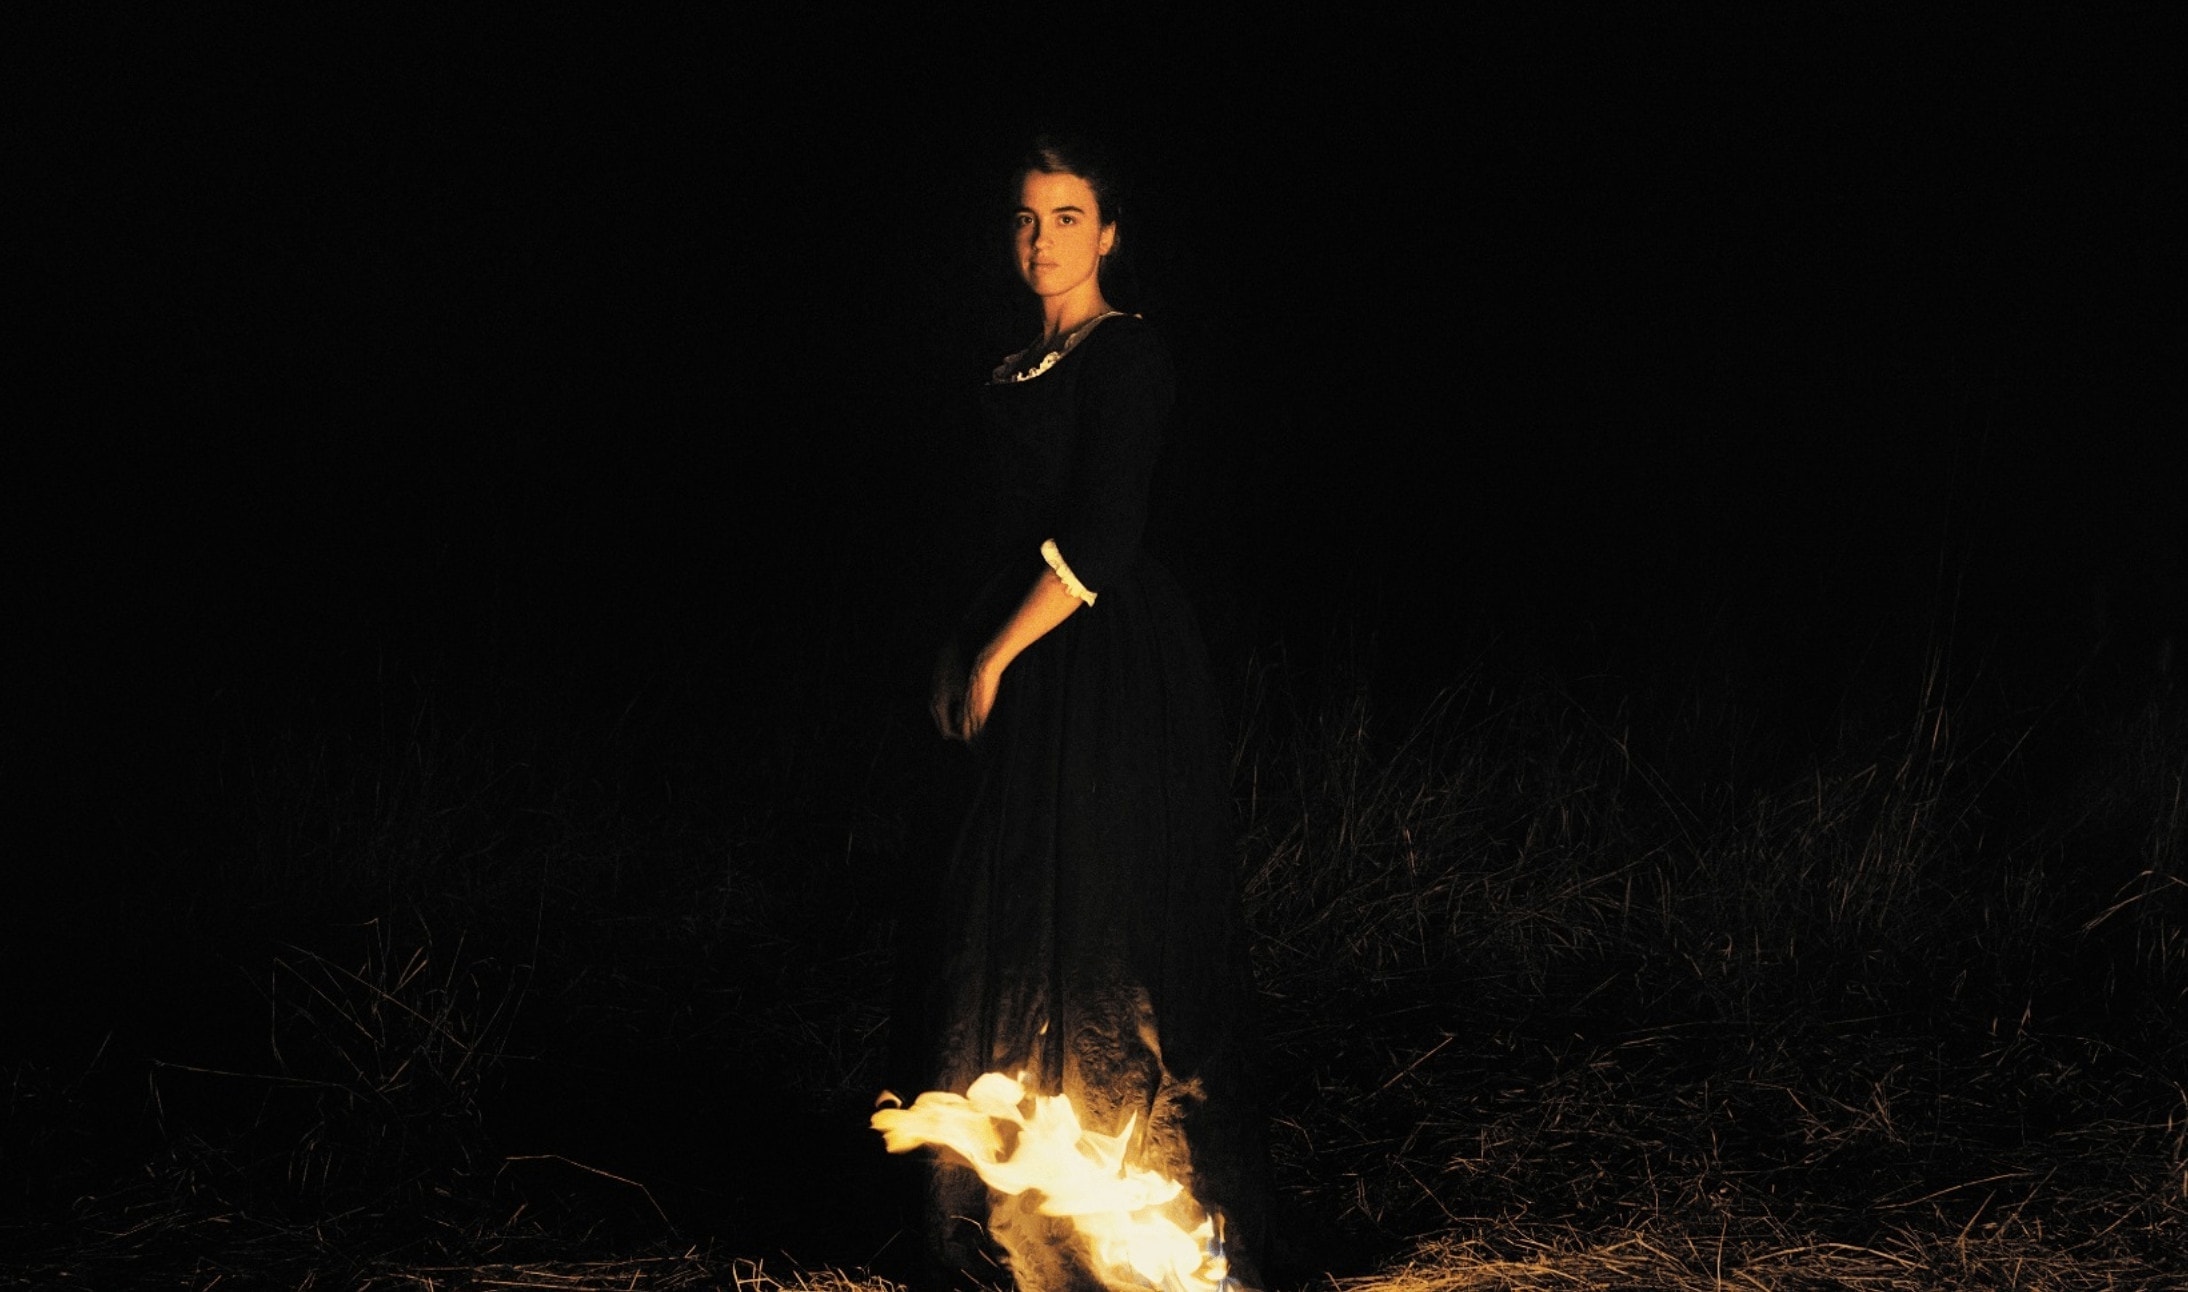 portrait of a lady on fire